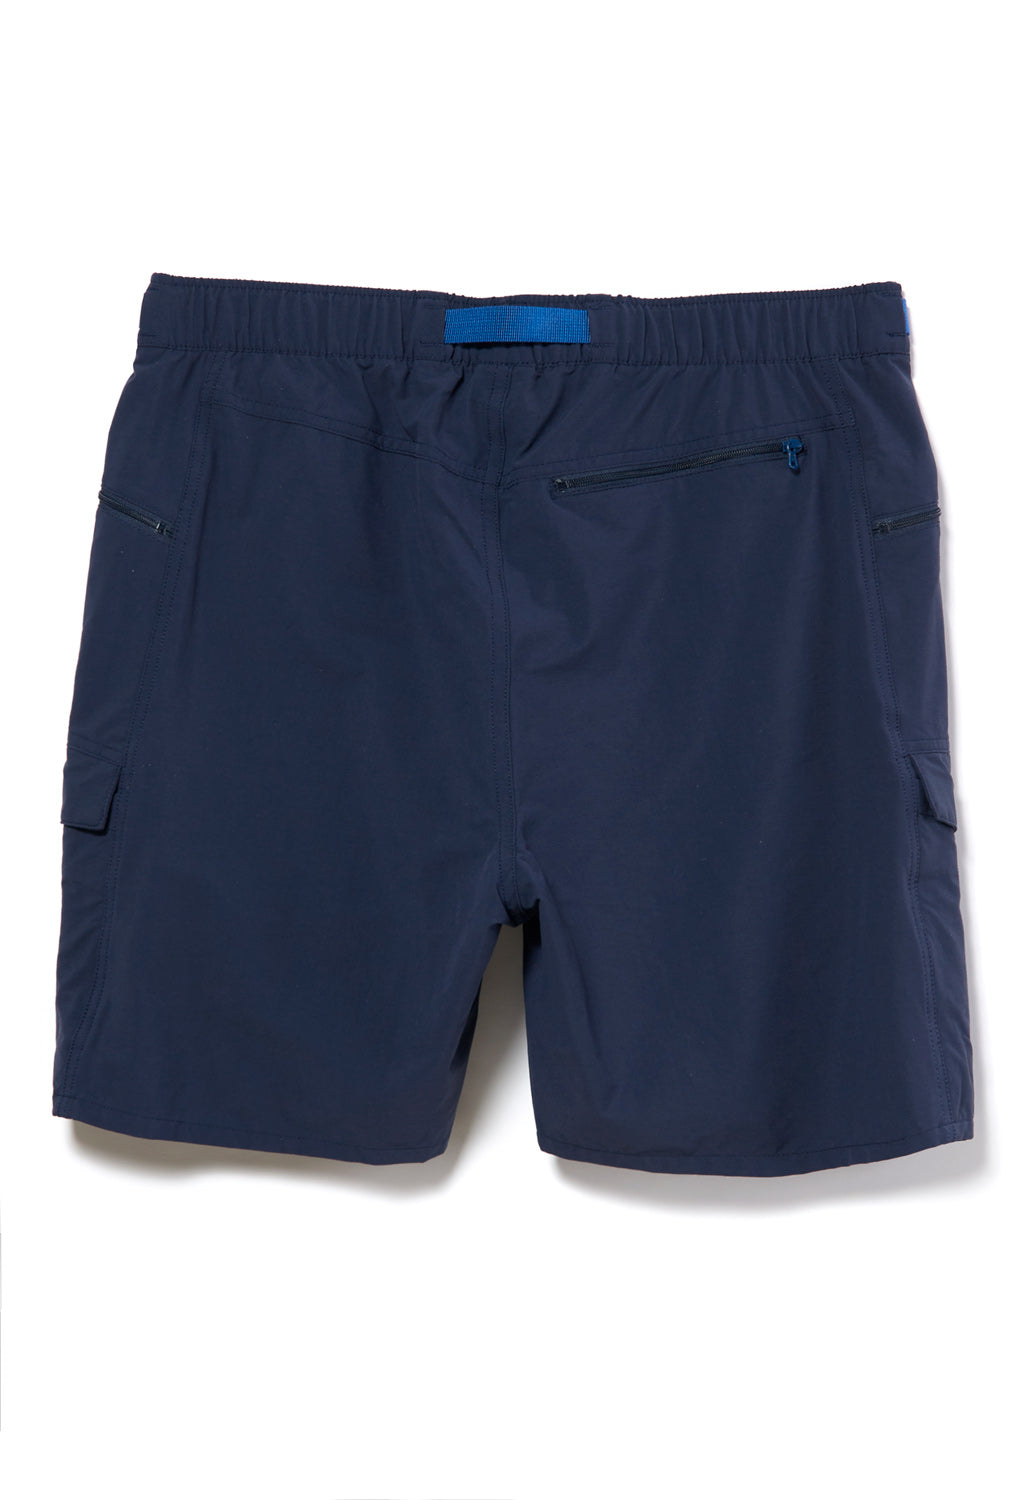 Patagonia Men's Outdoor Everyday 7" Shorts - New Navy